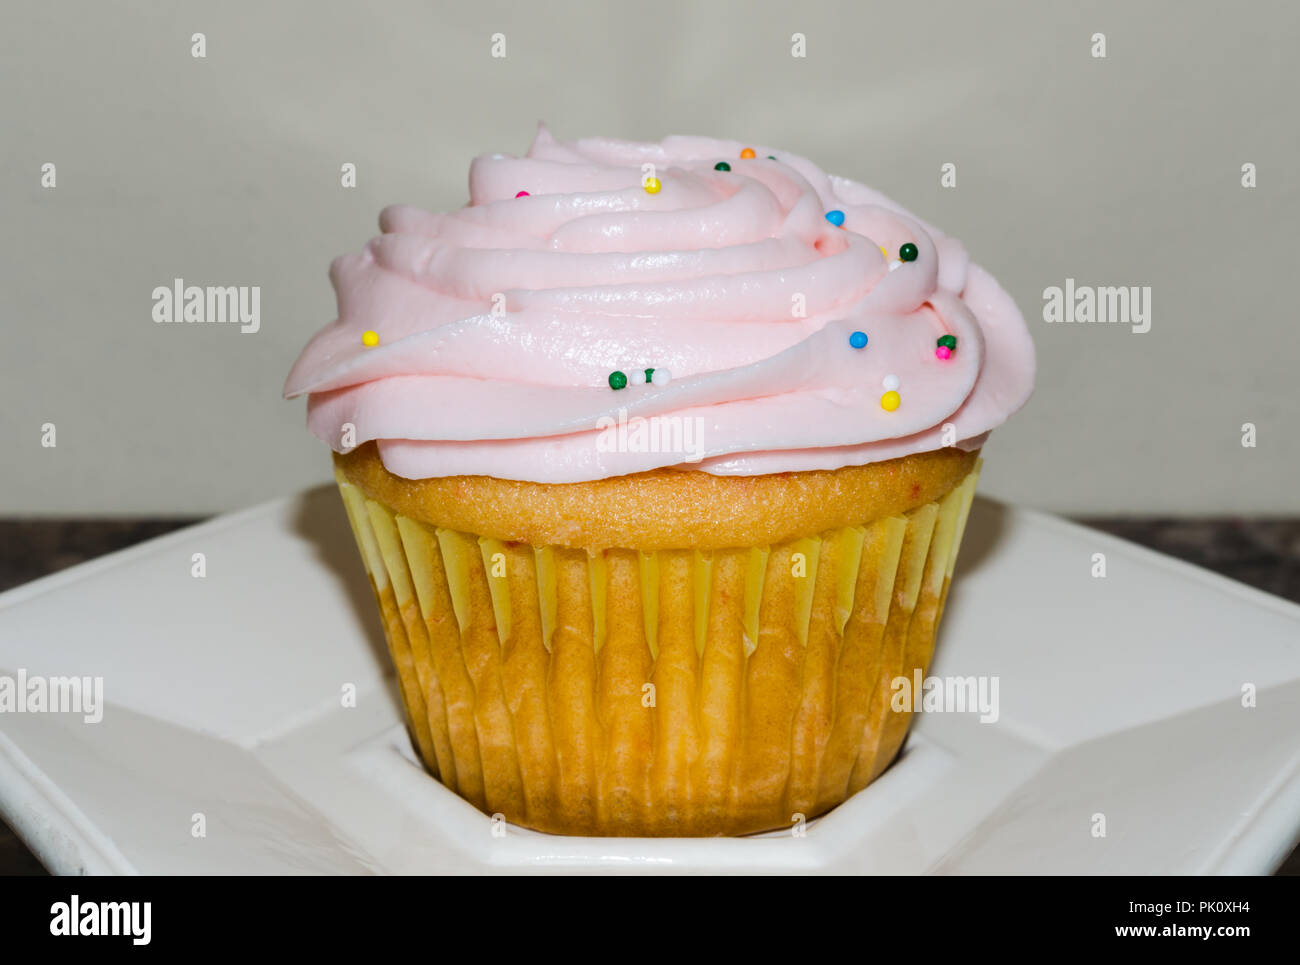 Light pink butter cream frosting swirled on top of fresh homemade cupcake. Colorful candy sprinkles sprinkled on top. Delicious sweet treat for party. Stock Photo